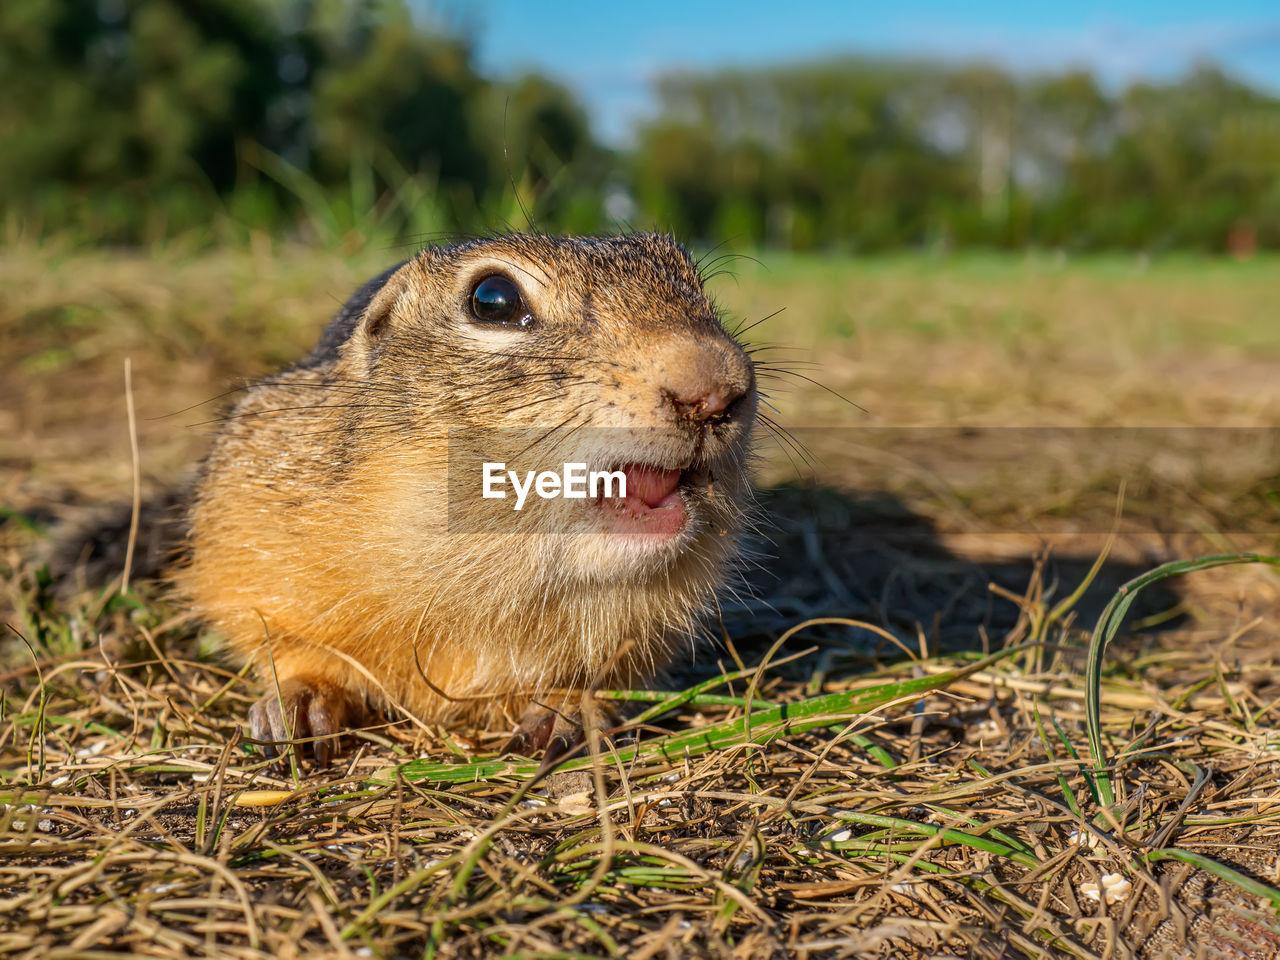 animal, animal themes, animal wildlife, one animal, wildlife, mammal, rodent, nature, whiskers, grass, squirrel, prairie, no people, prairie dog, close-up, eating, plant, day, portrait, outdoors, pet, land, focus on foreground, hamster, animal body part, chipmunk, brown